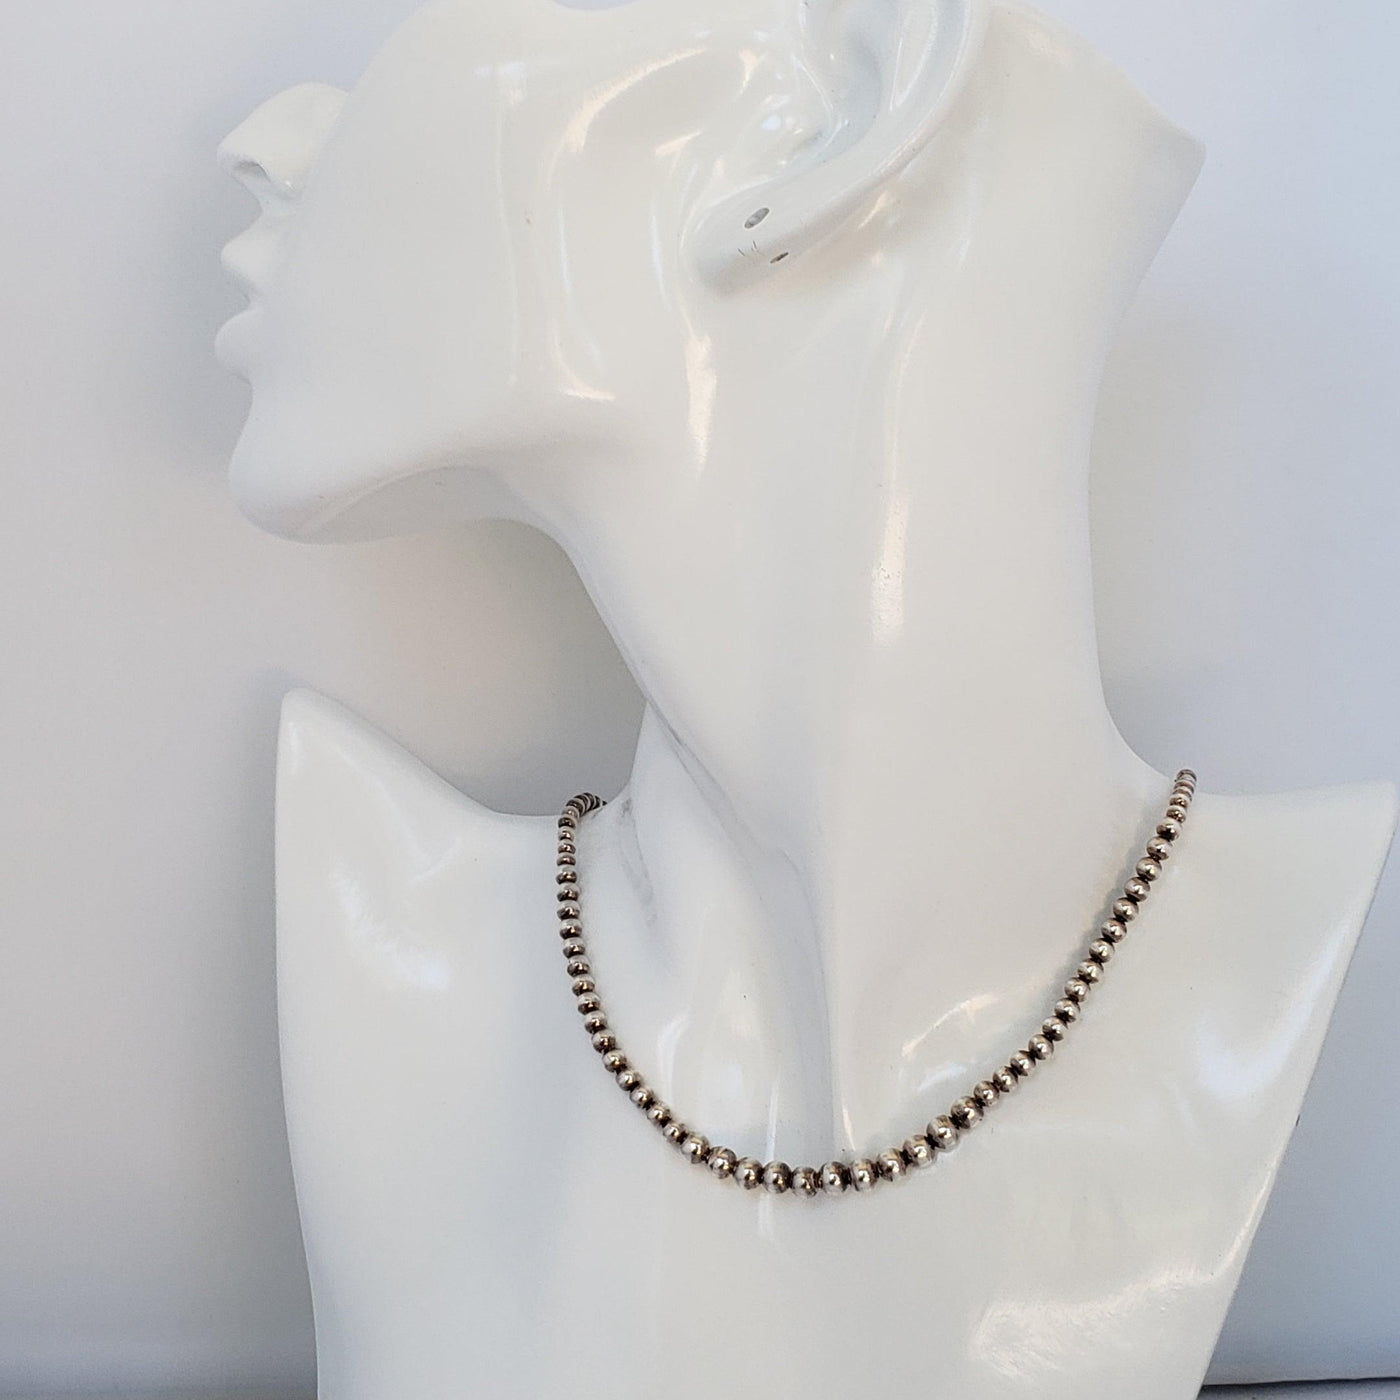 Graduated silver bead necklace